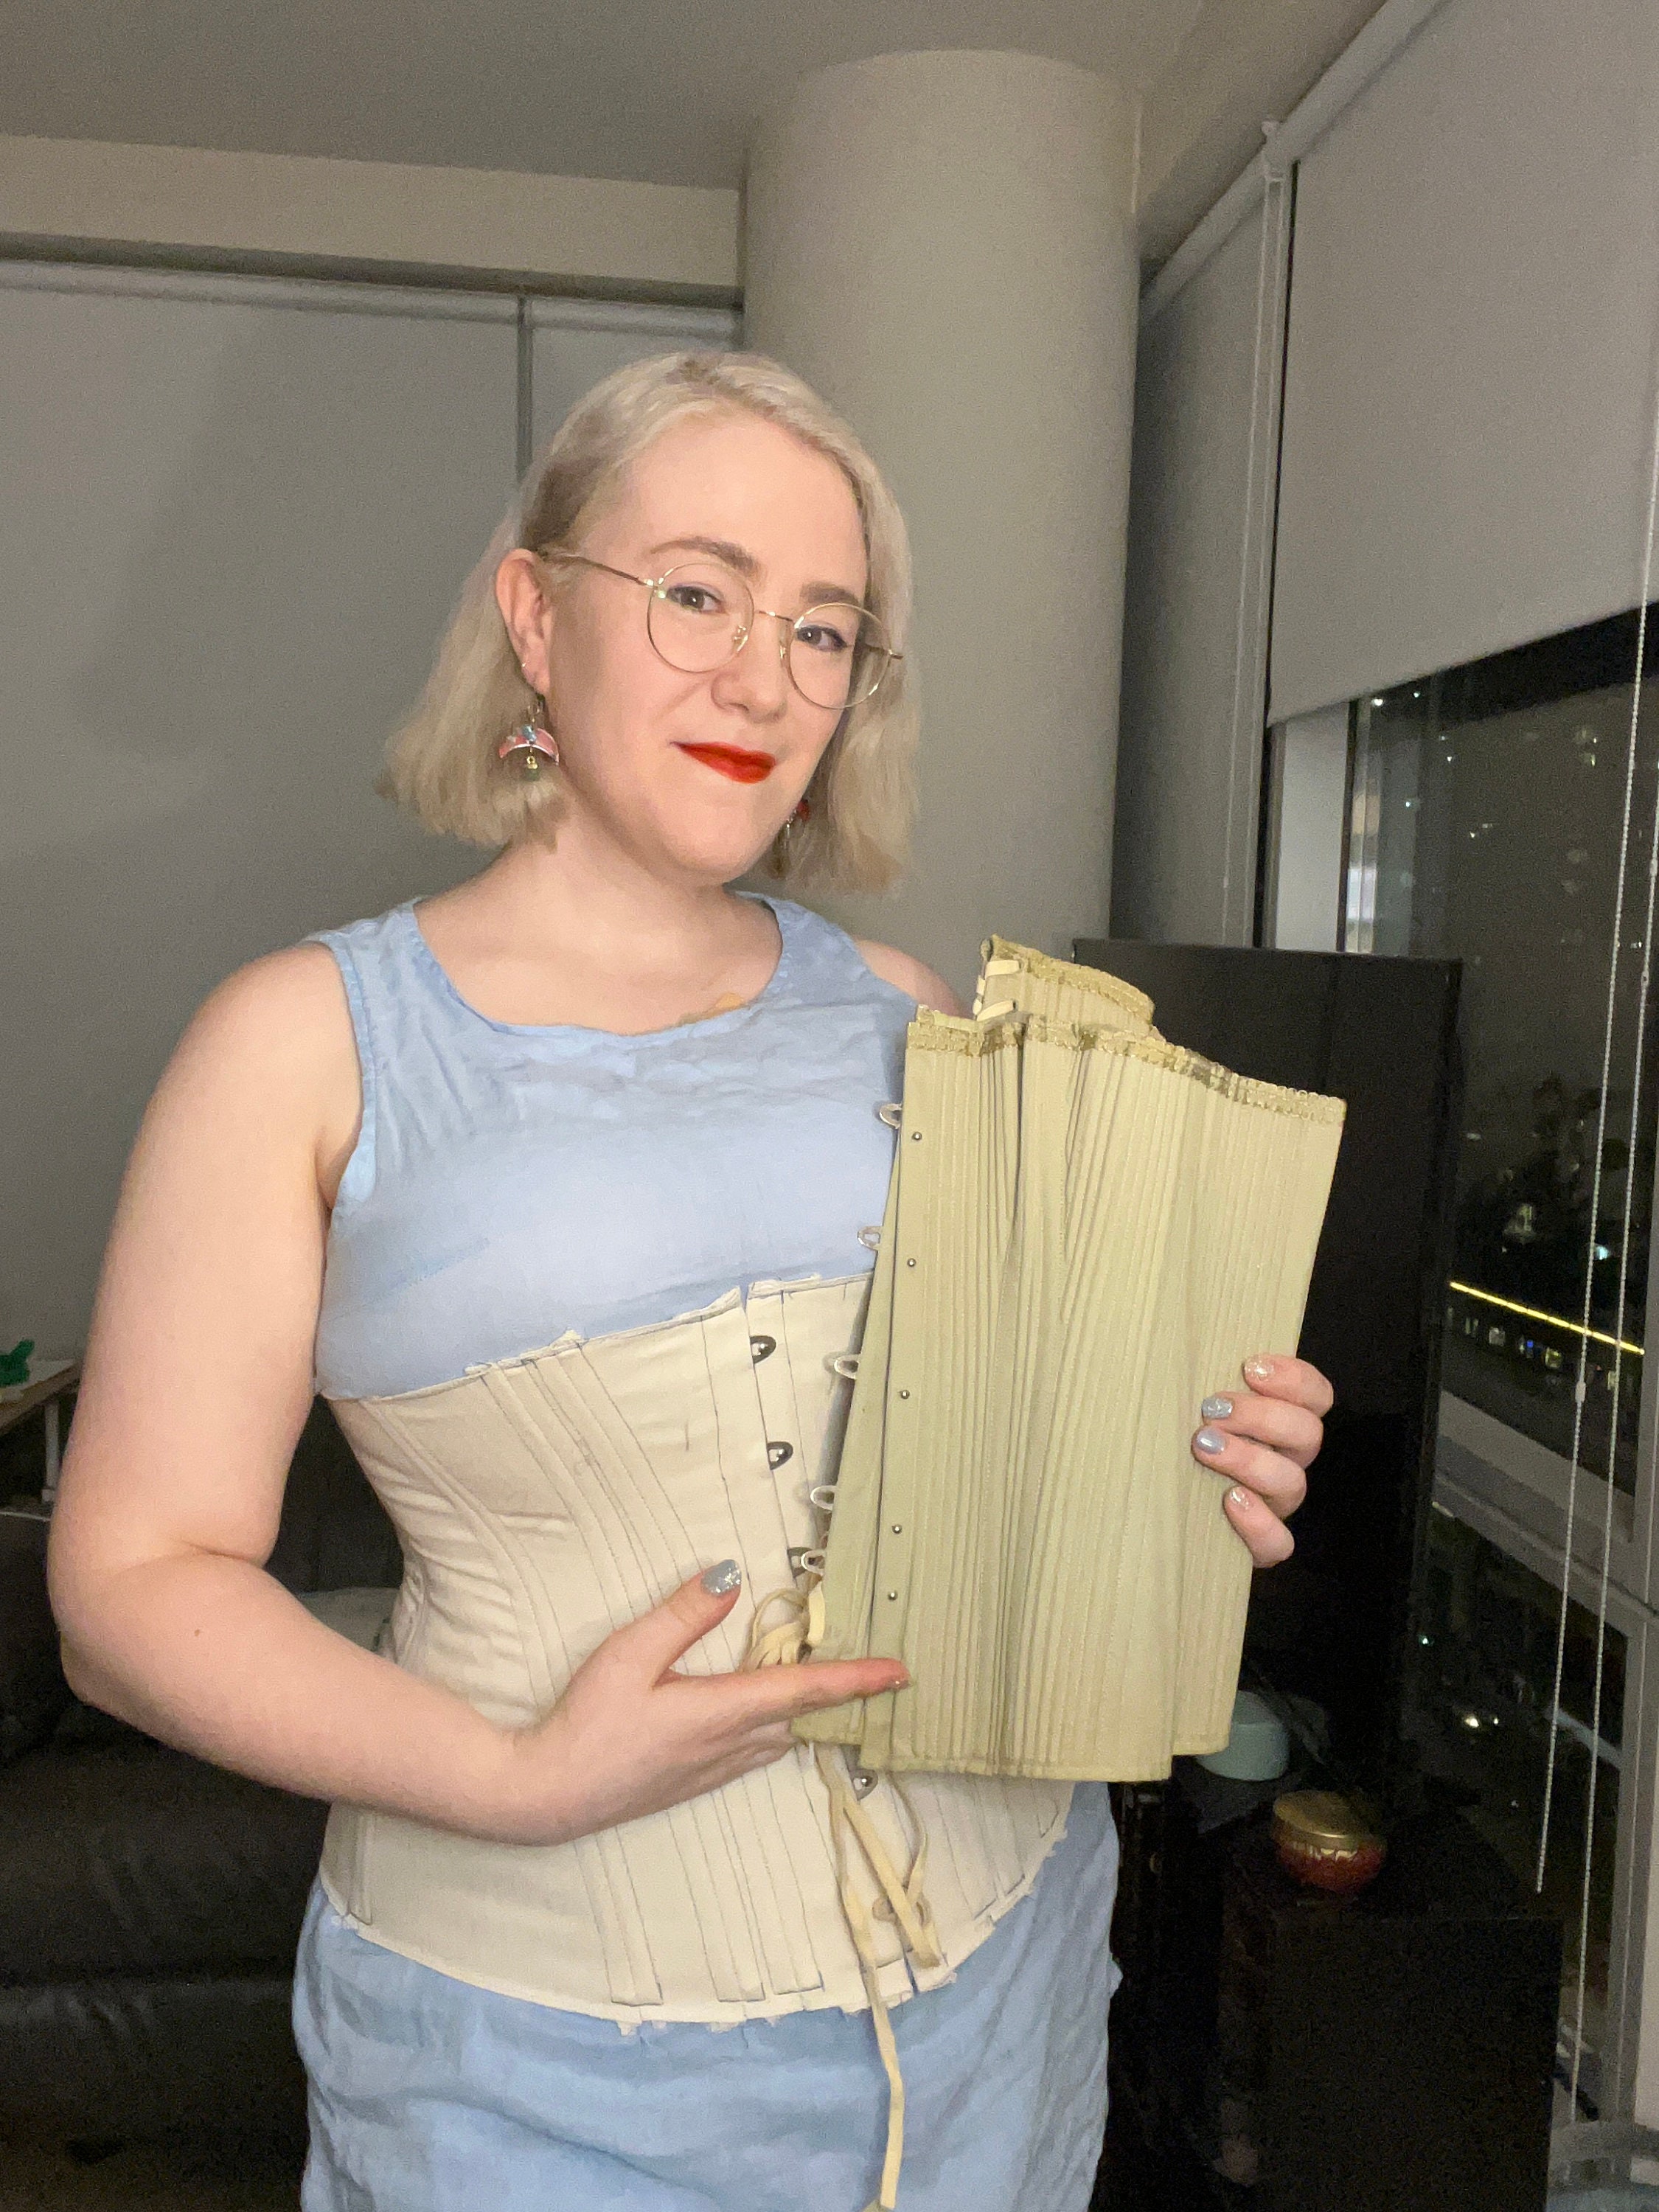 Sewing the No-Break plus-sized Victorian corded corset! A tutorial. 